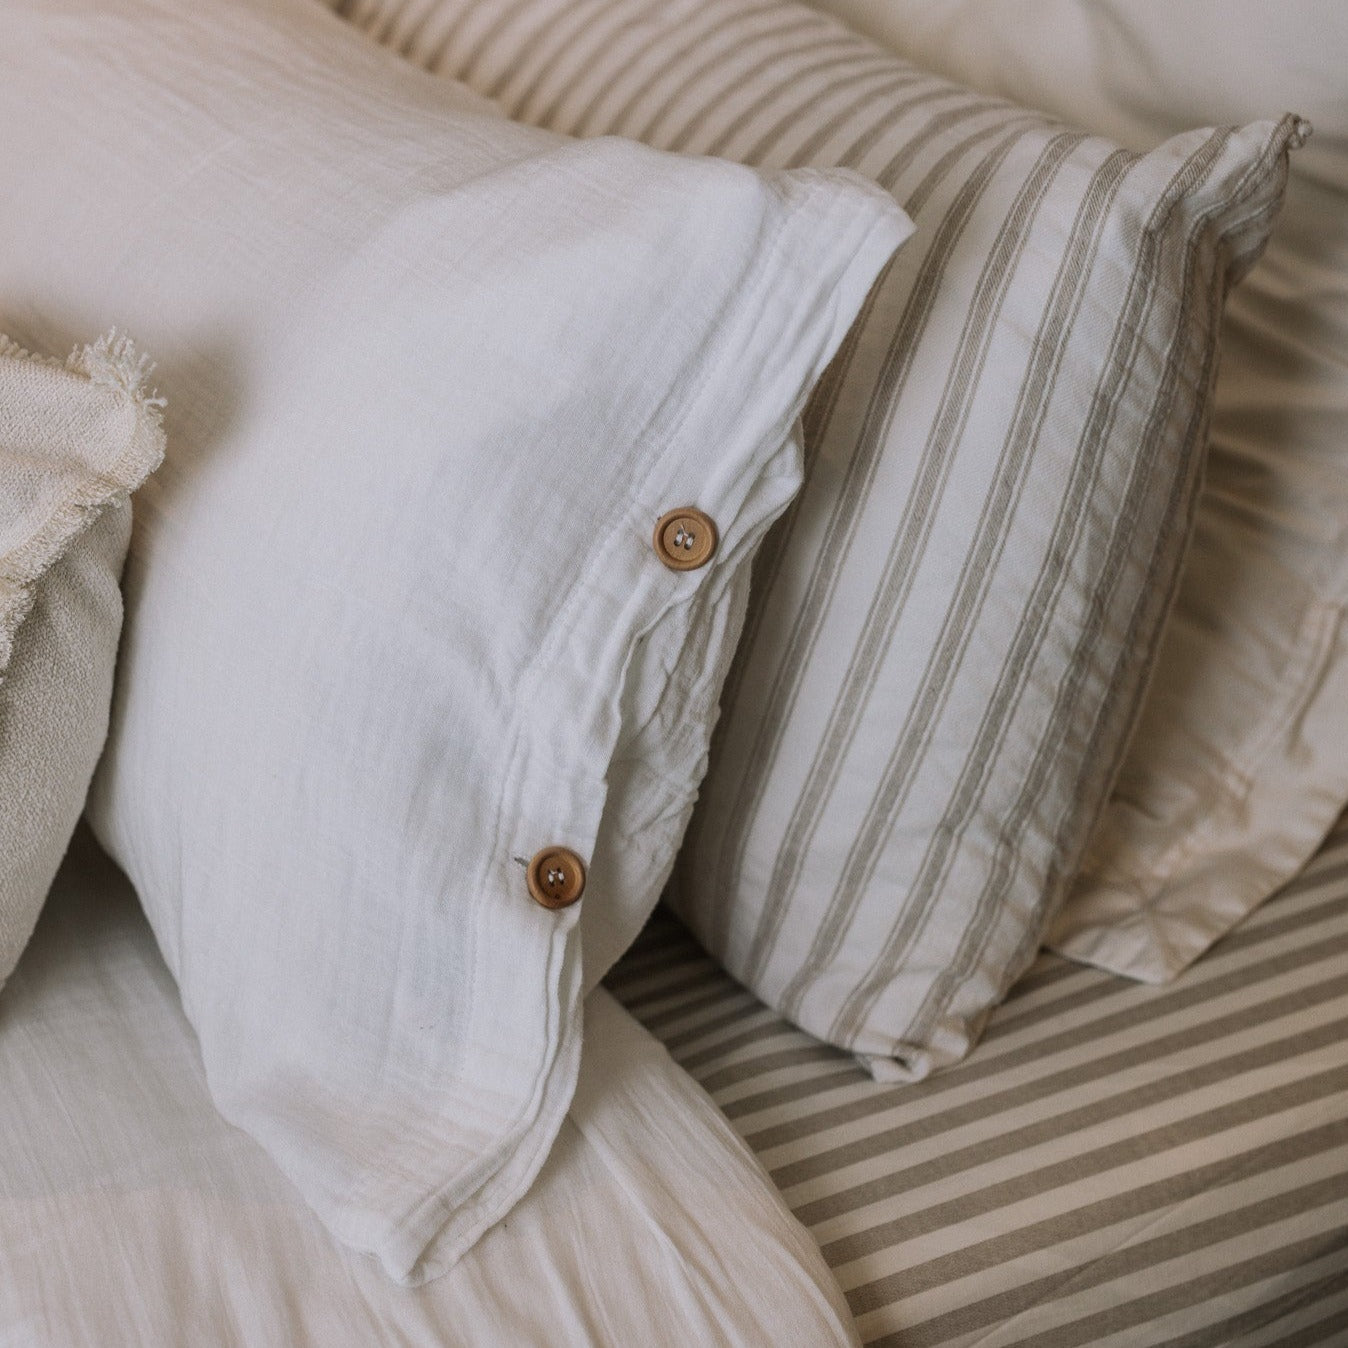 White and striped bedding with wooden button detailing.